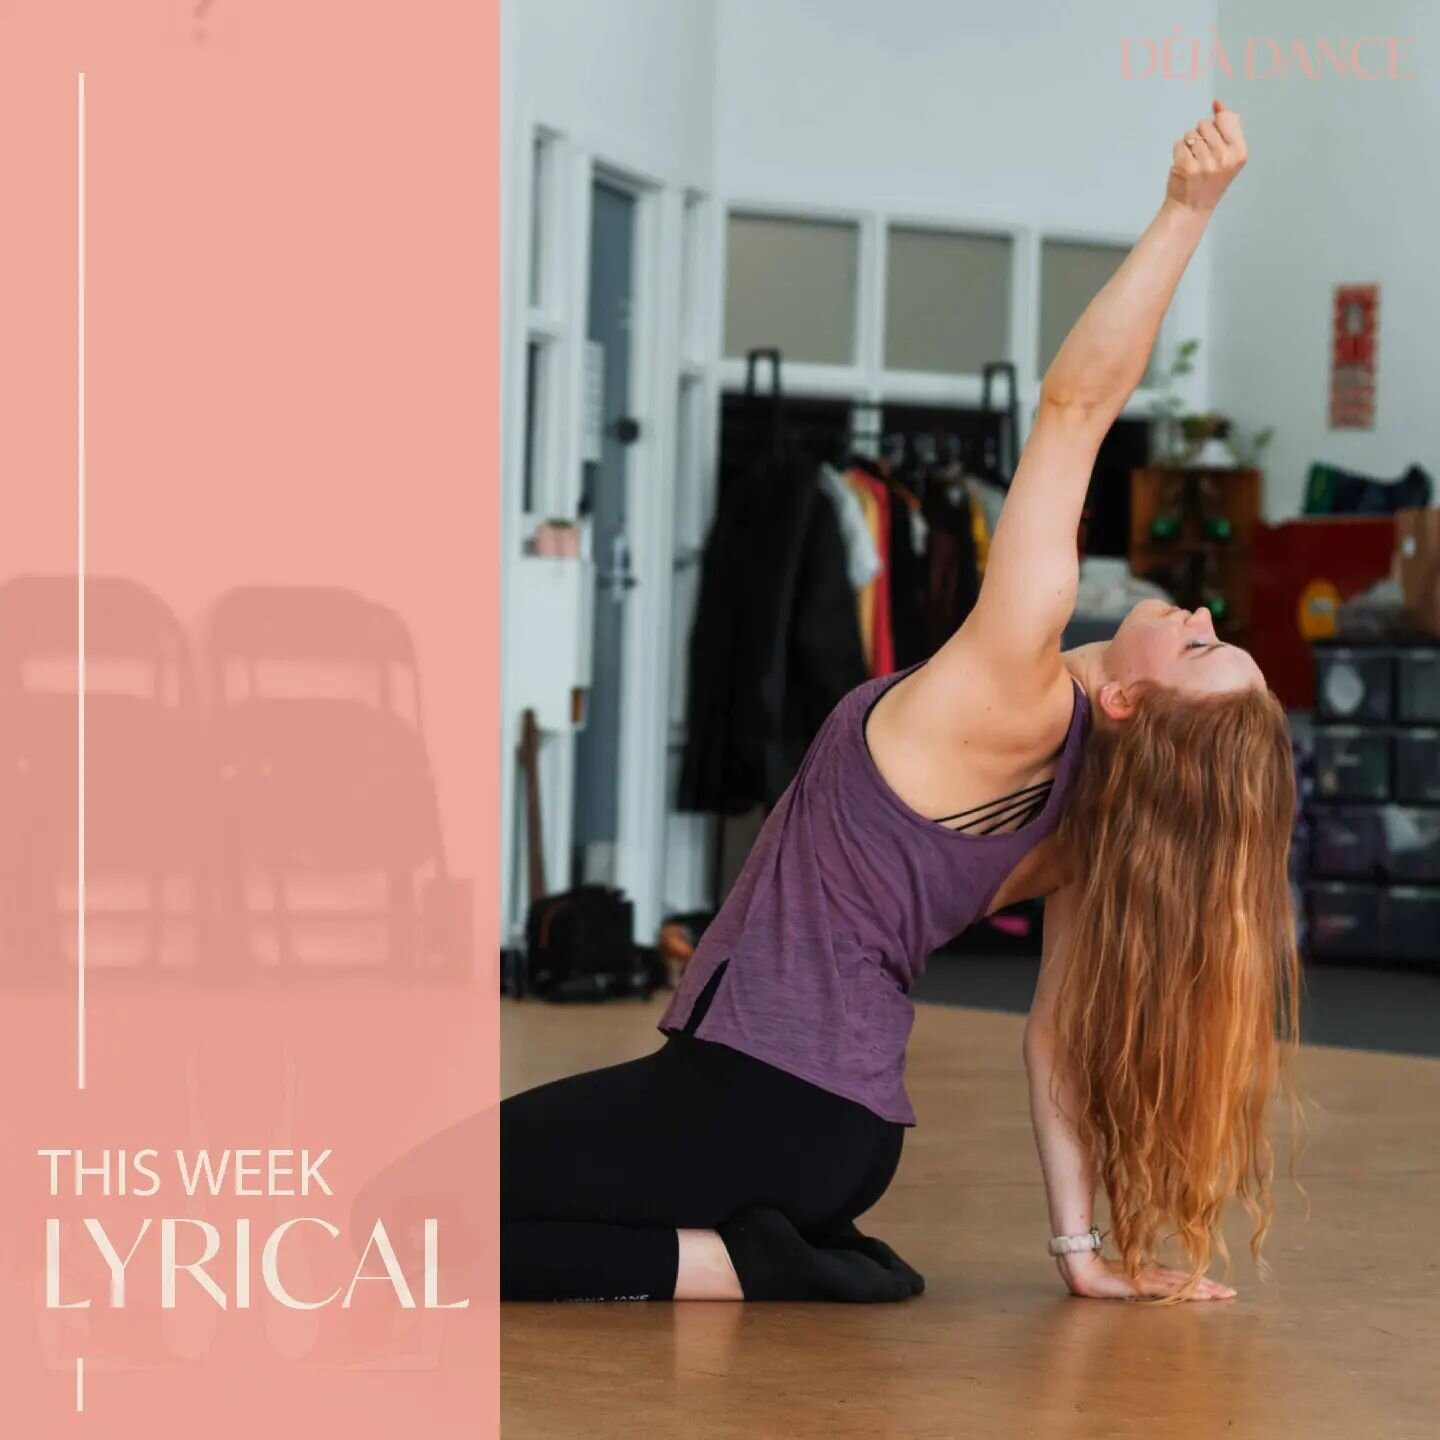 This week, we're dancing lyrical to the viral song &quot;Ceilings&quot; by Lizzy McAlpine, and we're covering that iconic section of the song that some of you may recognise! We started this lyrical routine last week, but this class is all fresh chore